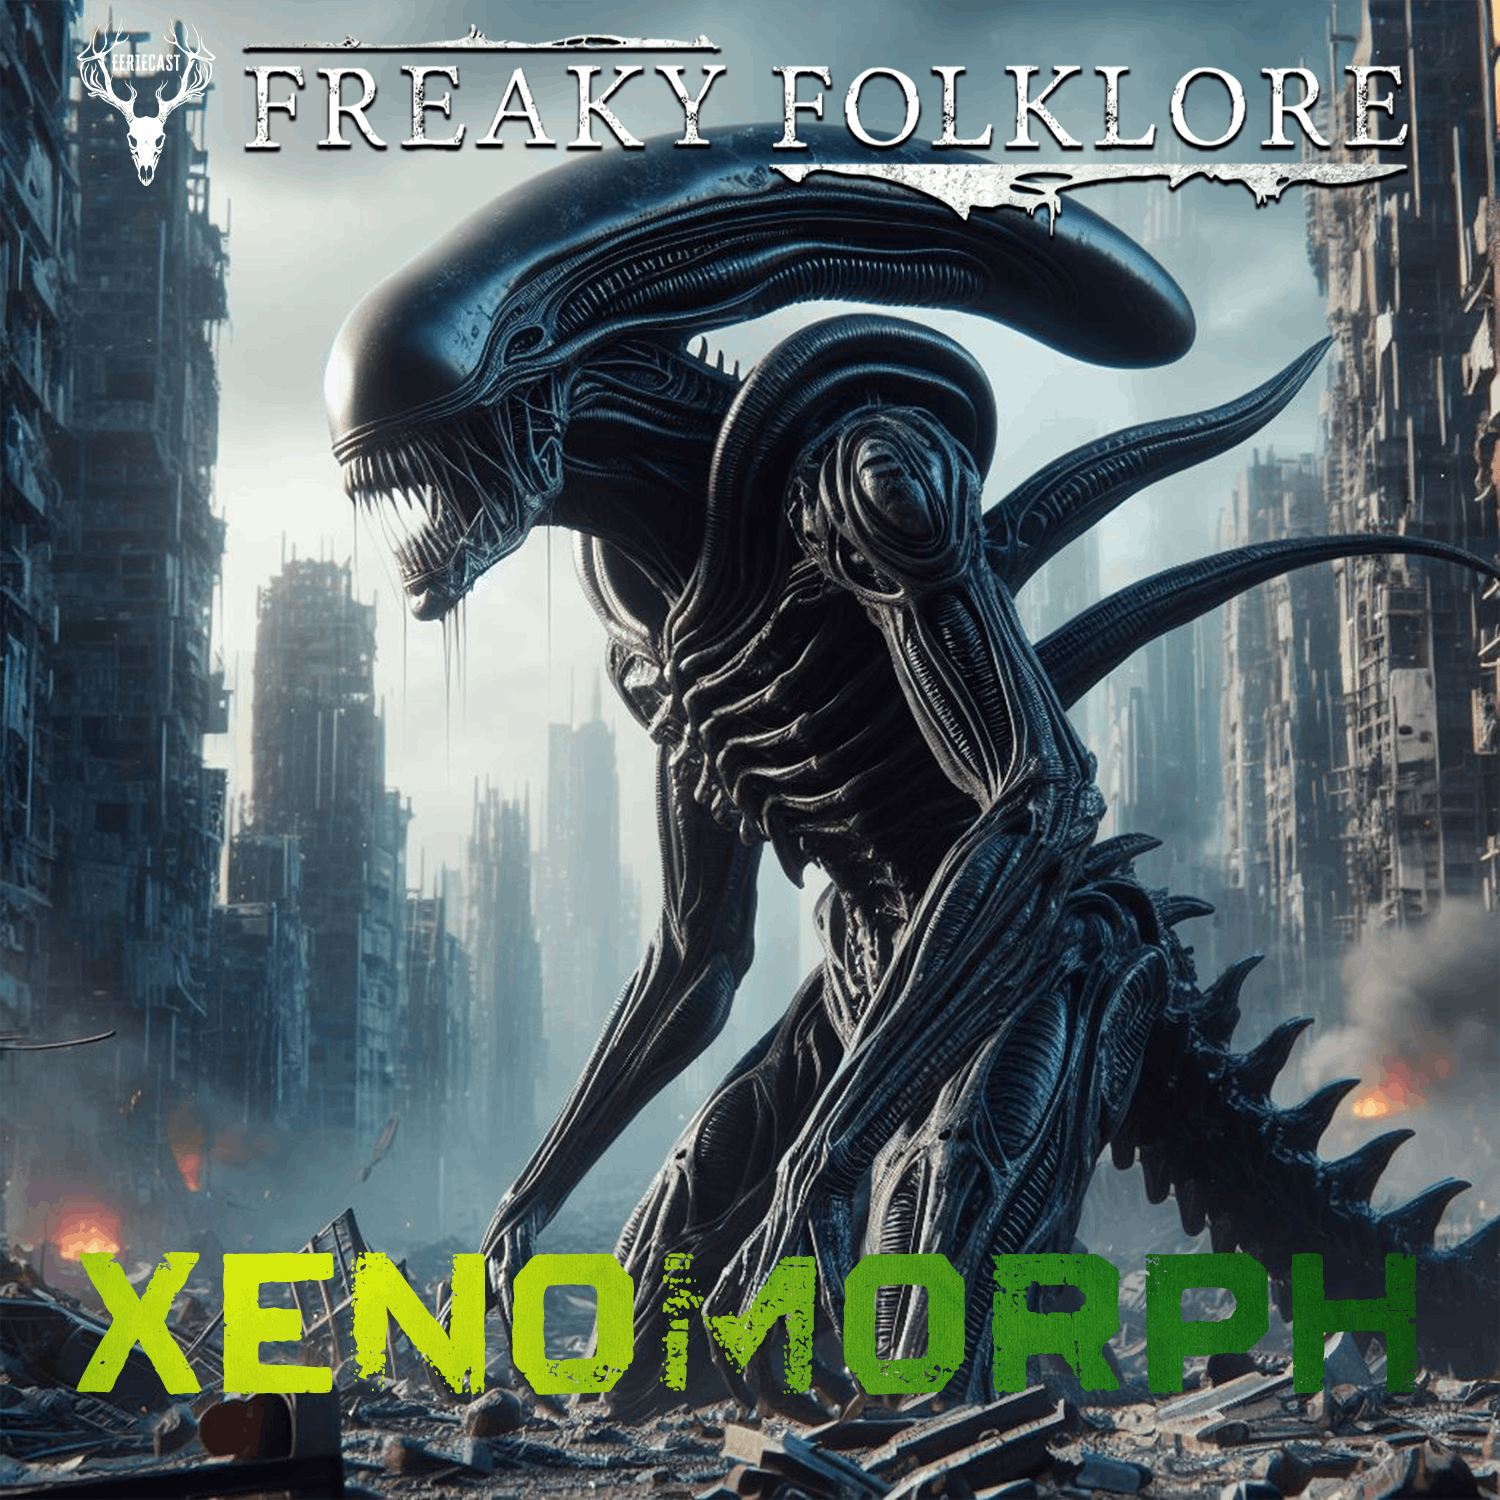 Aliens in Folklore – The XENOMORPHS